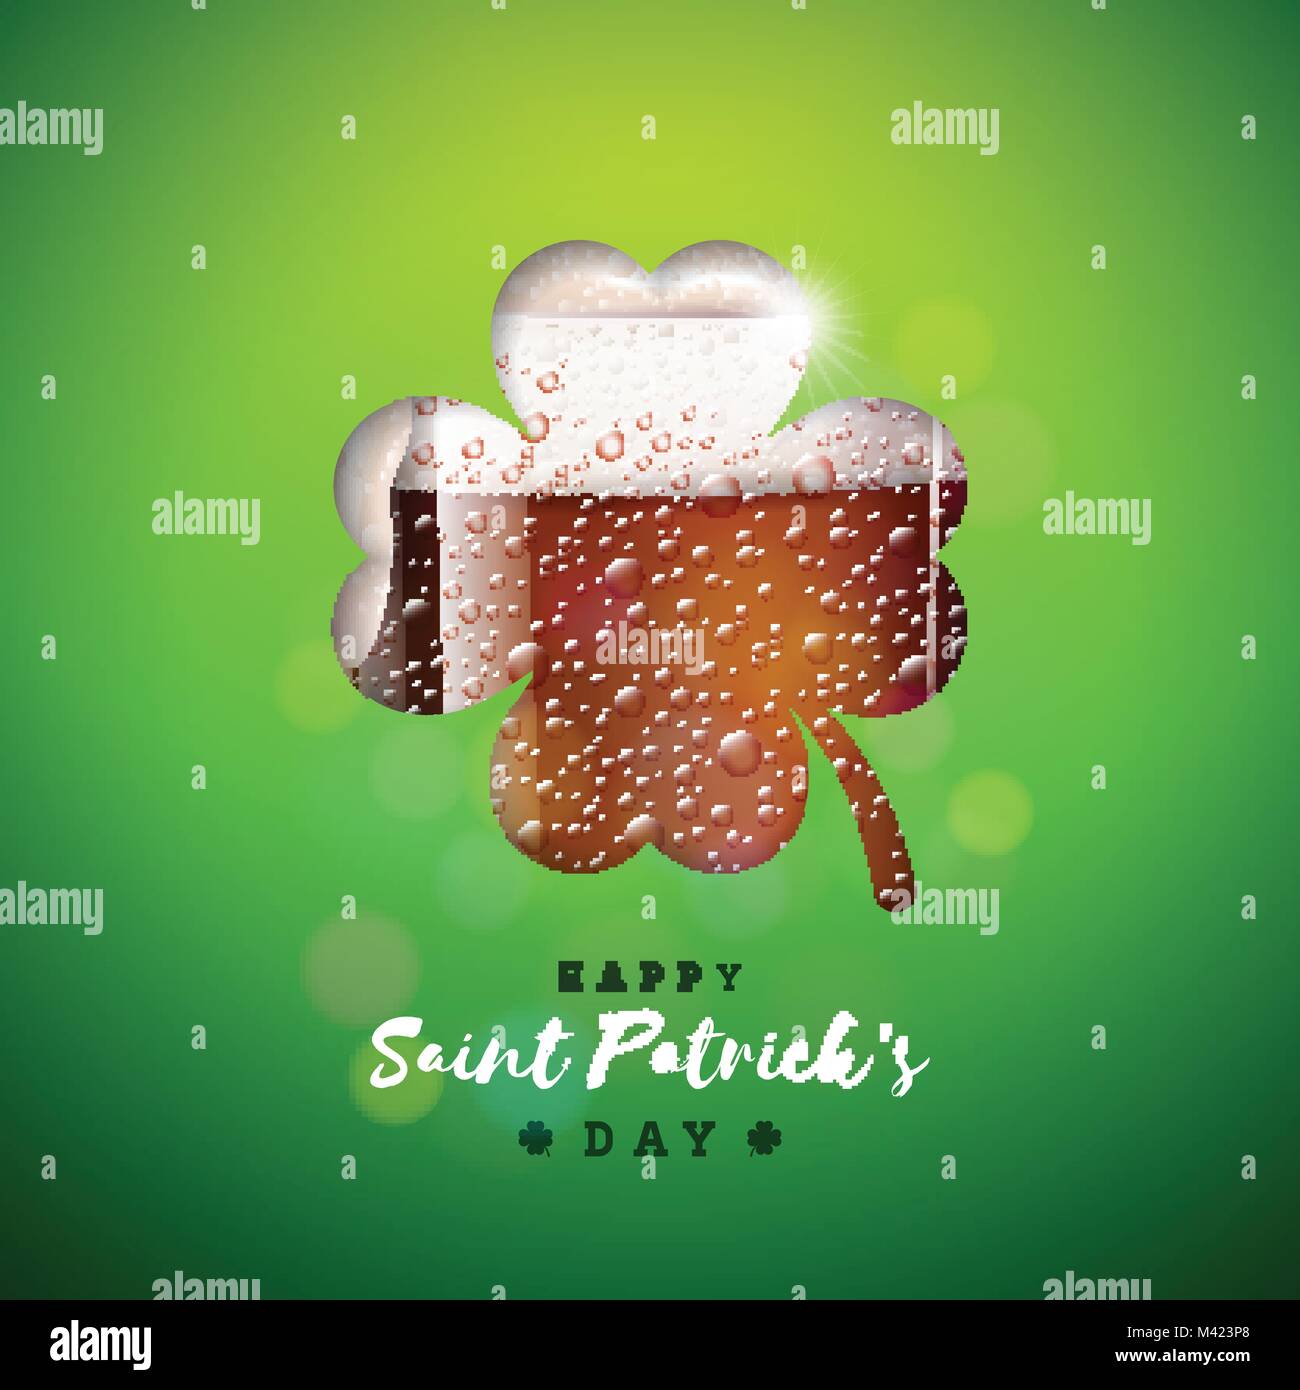 Saint Patricks Day Design with Fresh Dark Beer in Clover Silhouette on Green Background. Irish Festival Celebration Holiday Design with typography and Shamrock for Greeting Card, Party Invitation or Promo Banner. Stock Vector